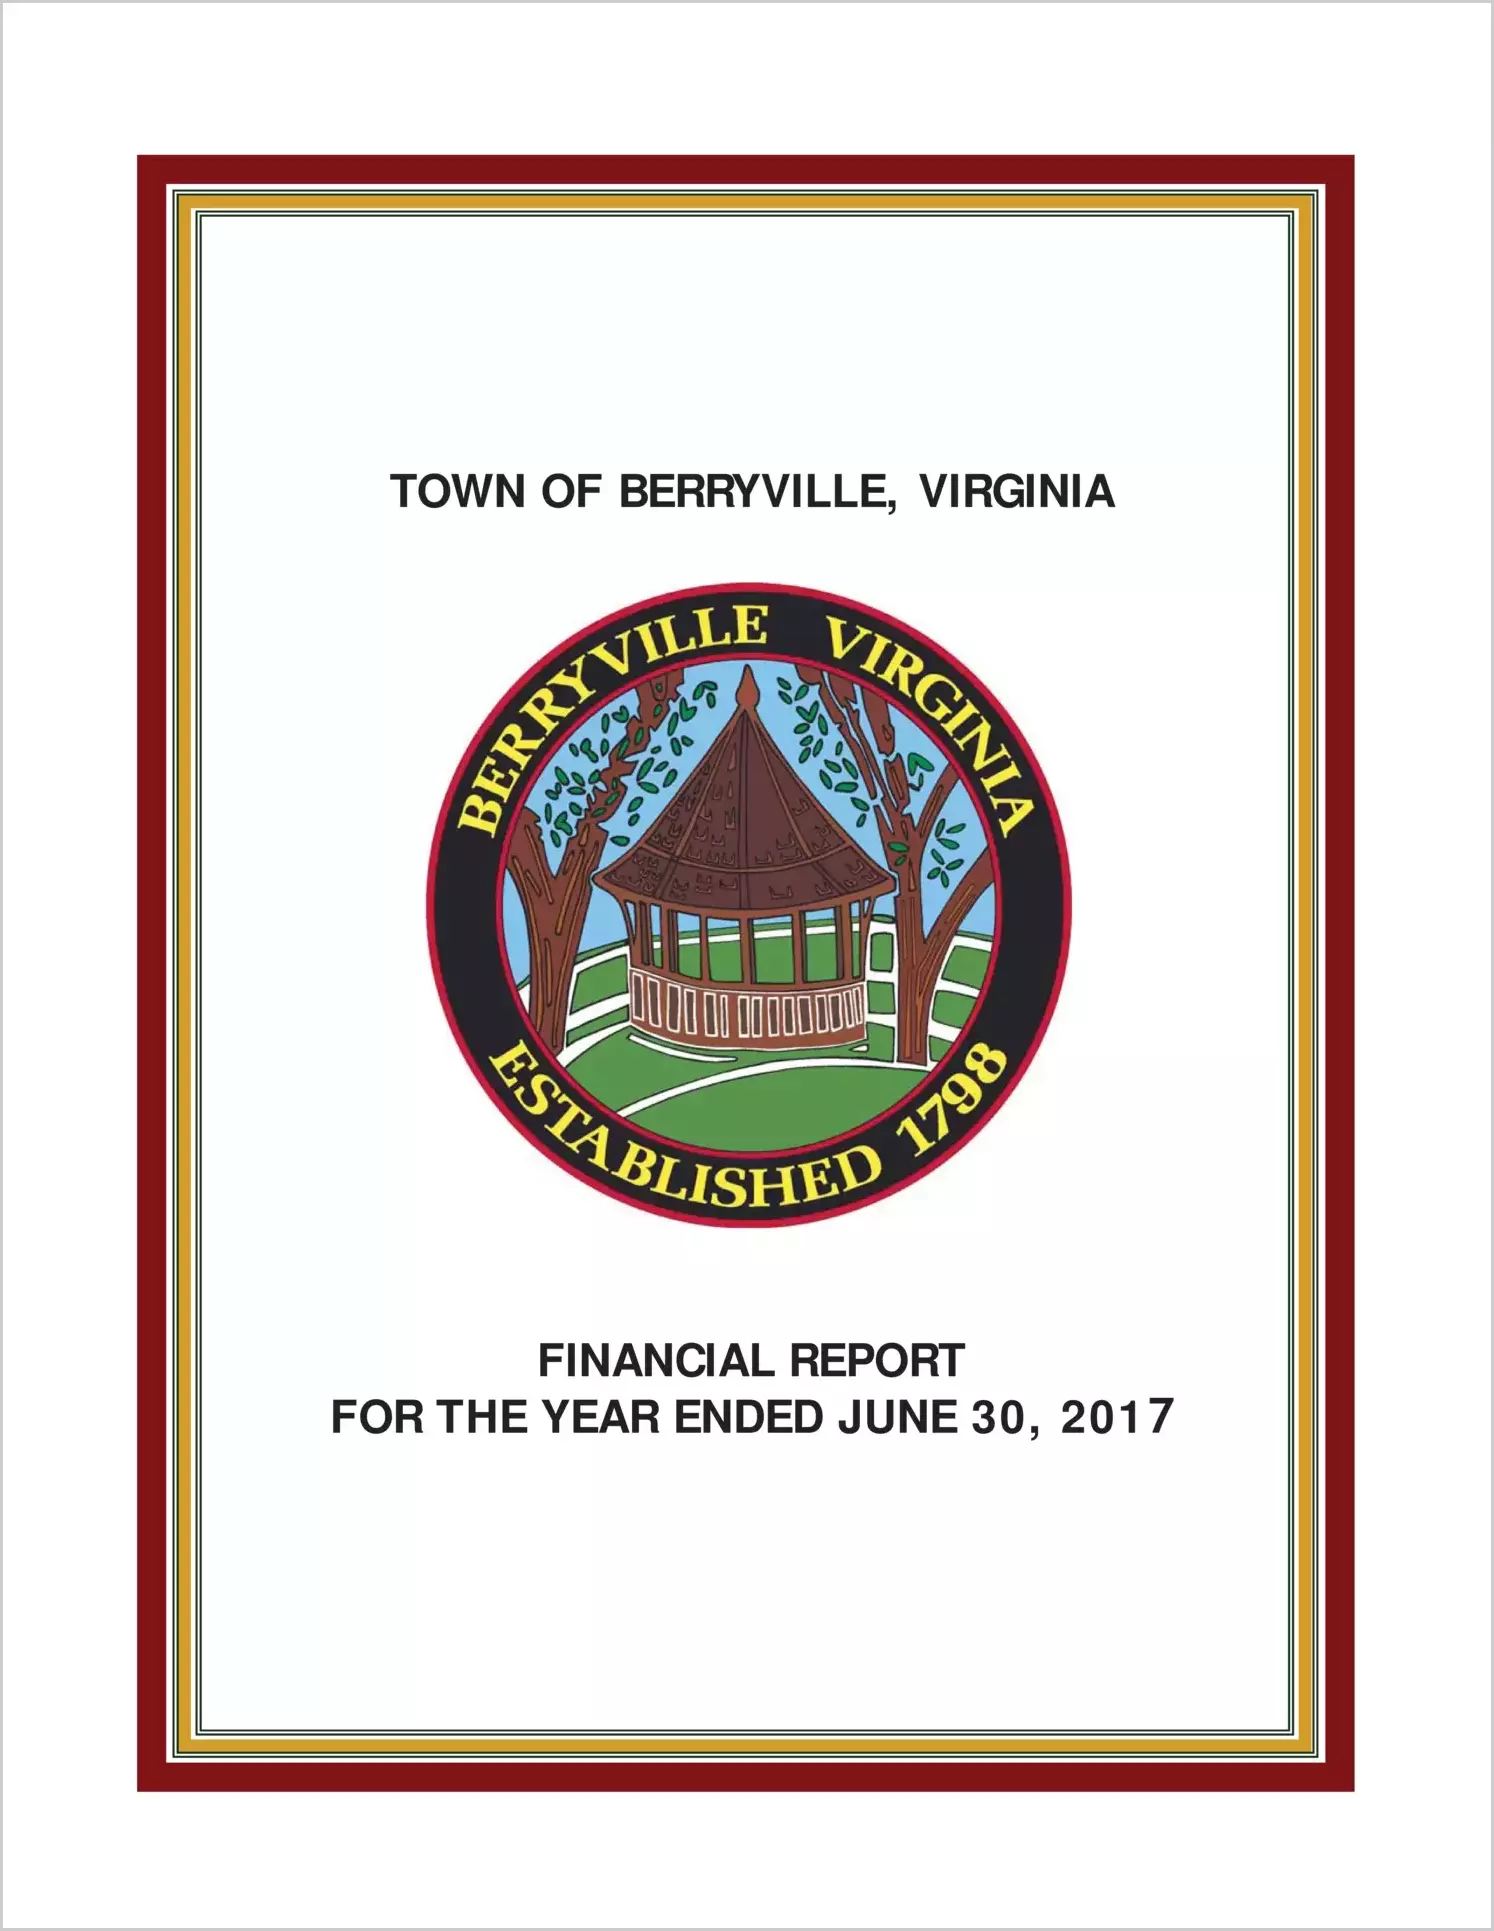 2017 Annual Financial Report for Town of Berryville